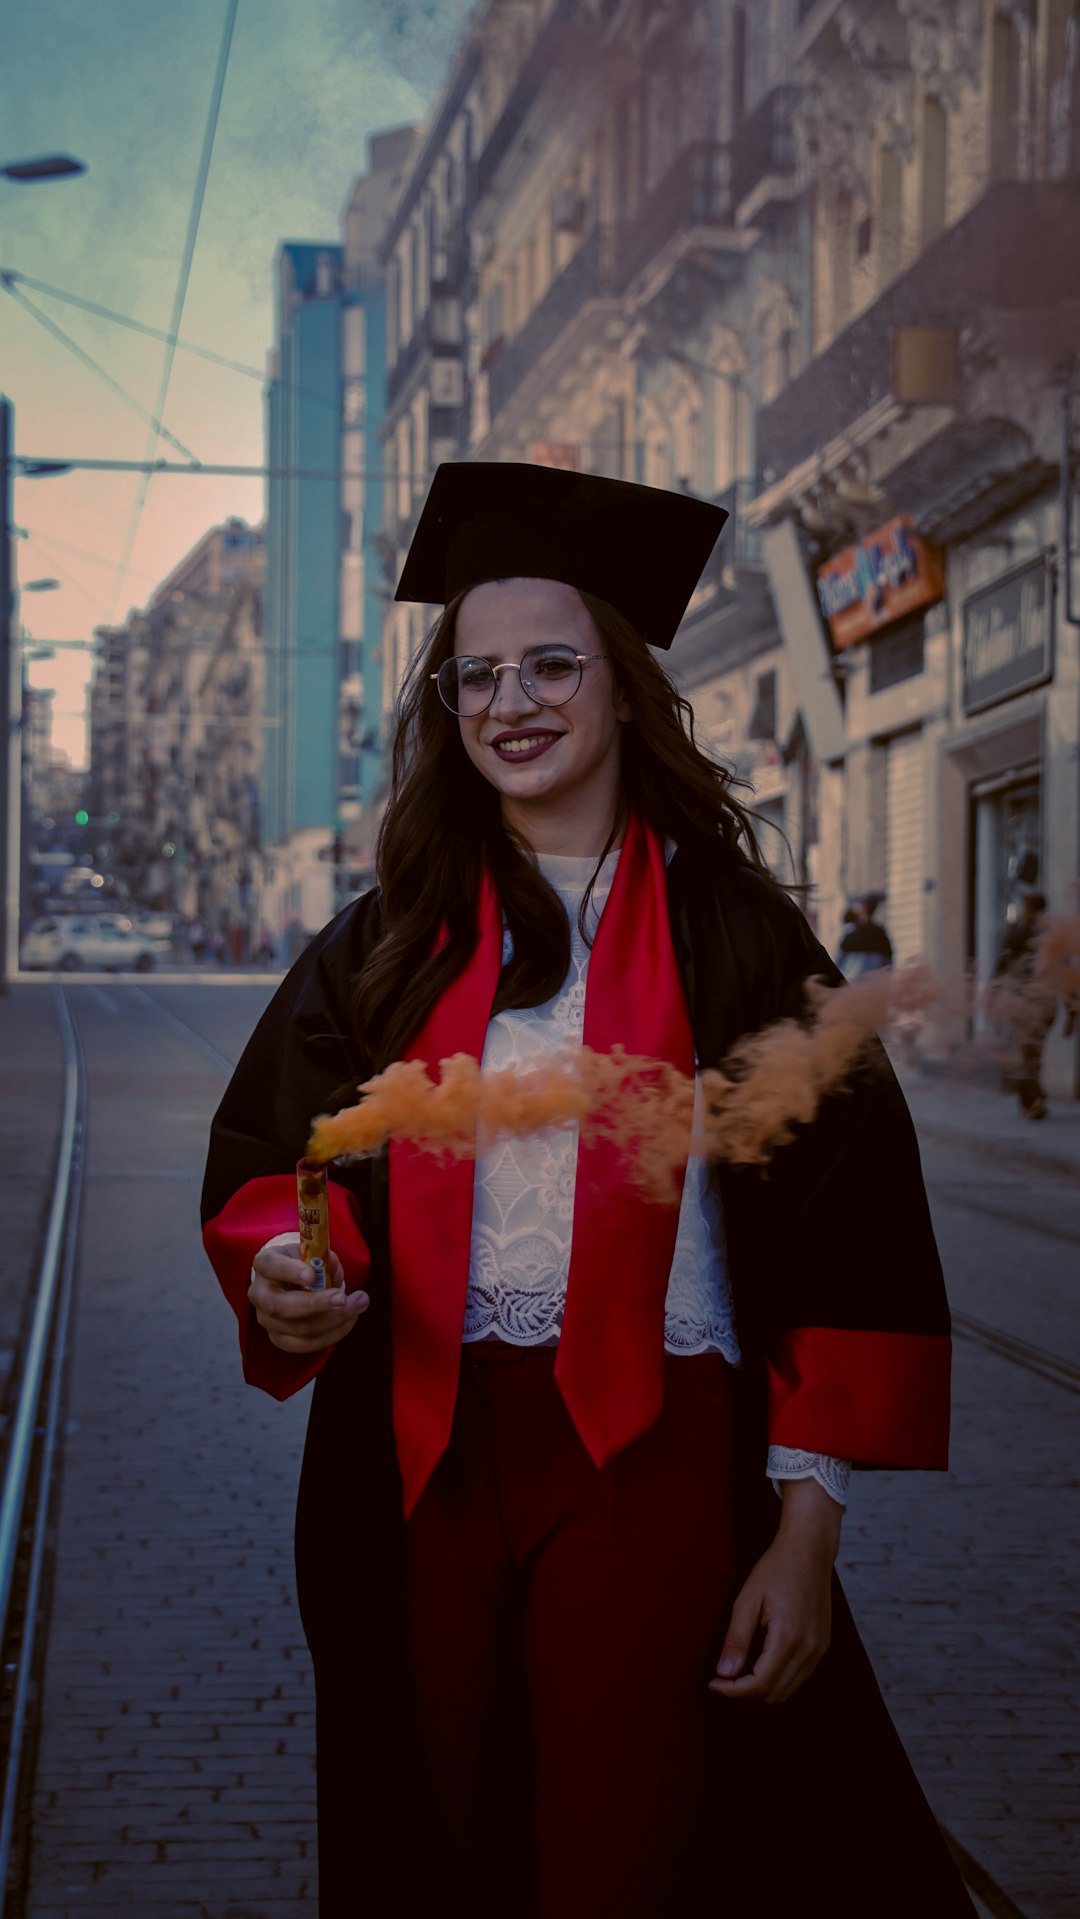 woman in academic dress holding bread